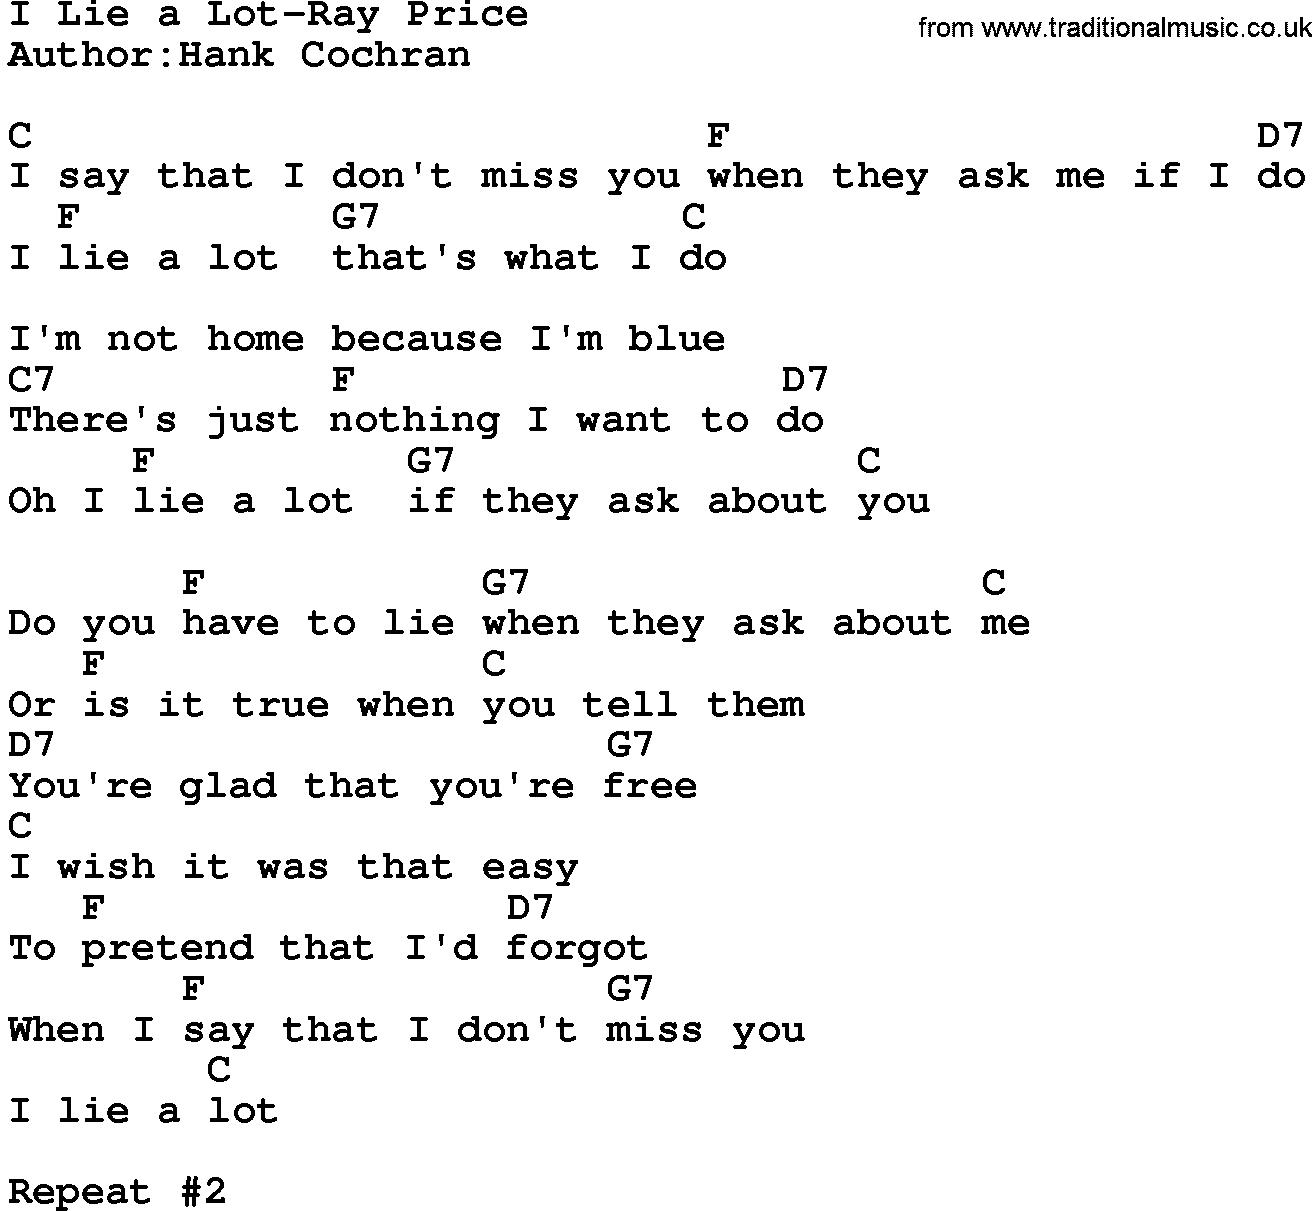 Country music song: I Lie A Lot-Ray Price lyrics and chords